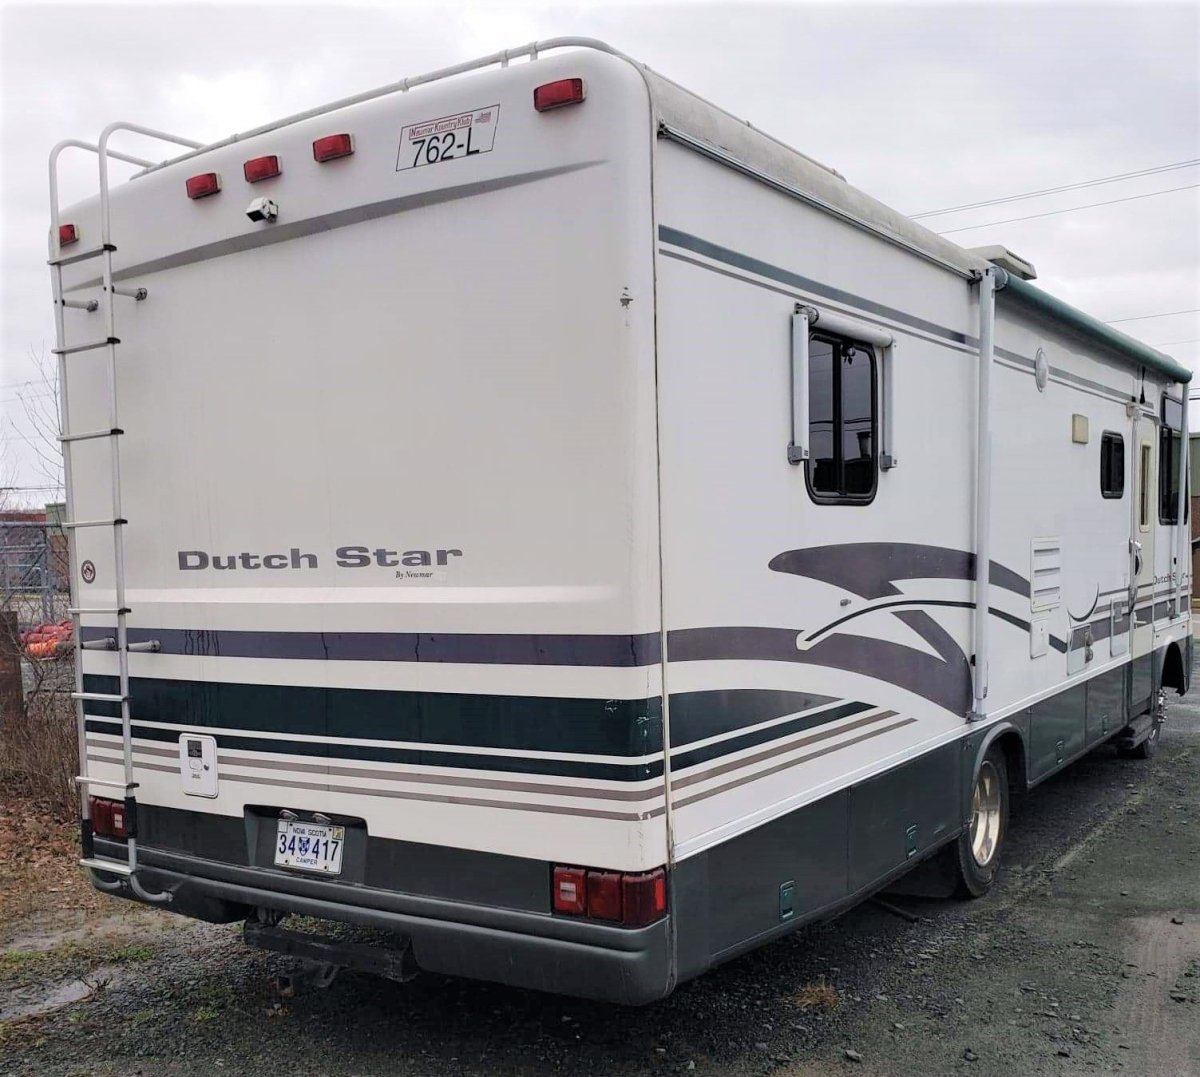 Pictou County District RCMP is investigating a break and enter involving a theft of firearms, an RV and ATV from a property on Shady Ln. in Pictou Landing, N.S. 

